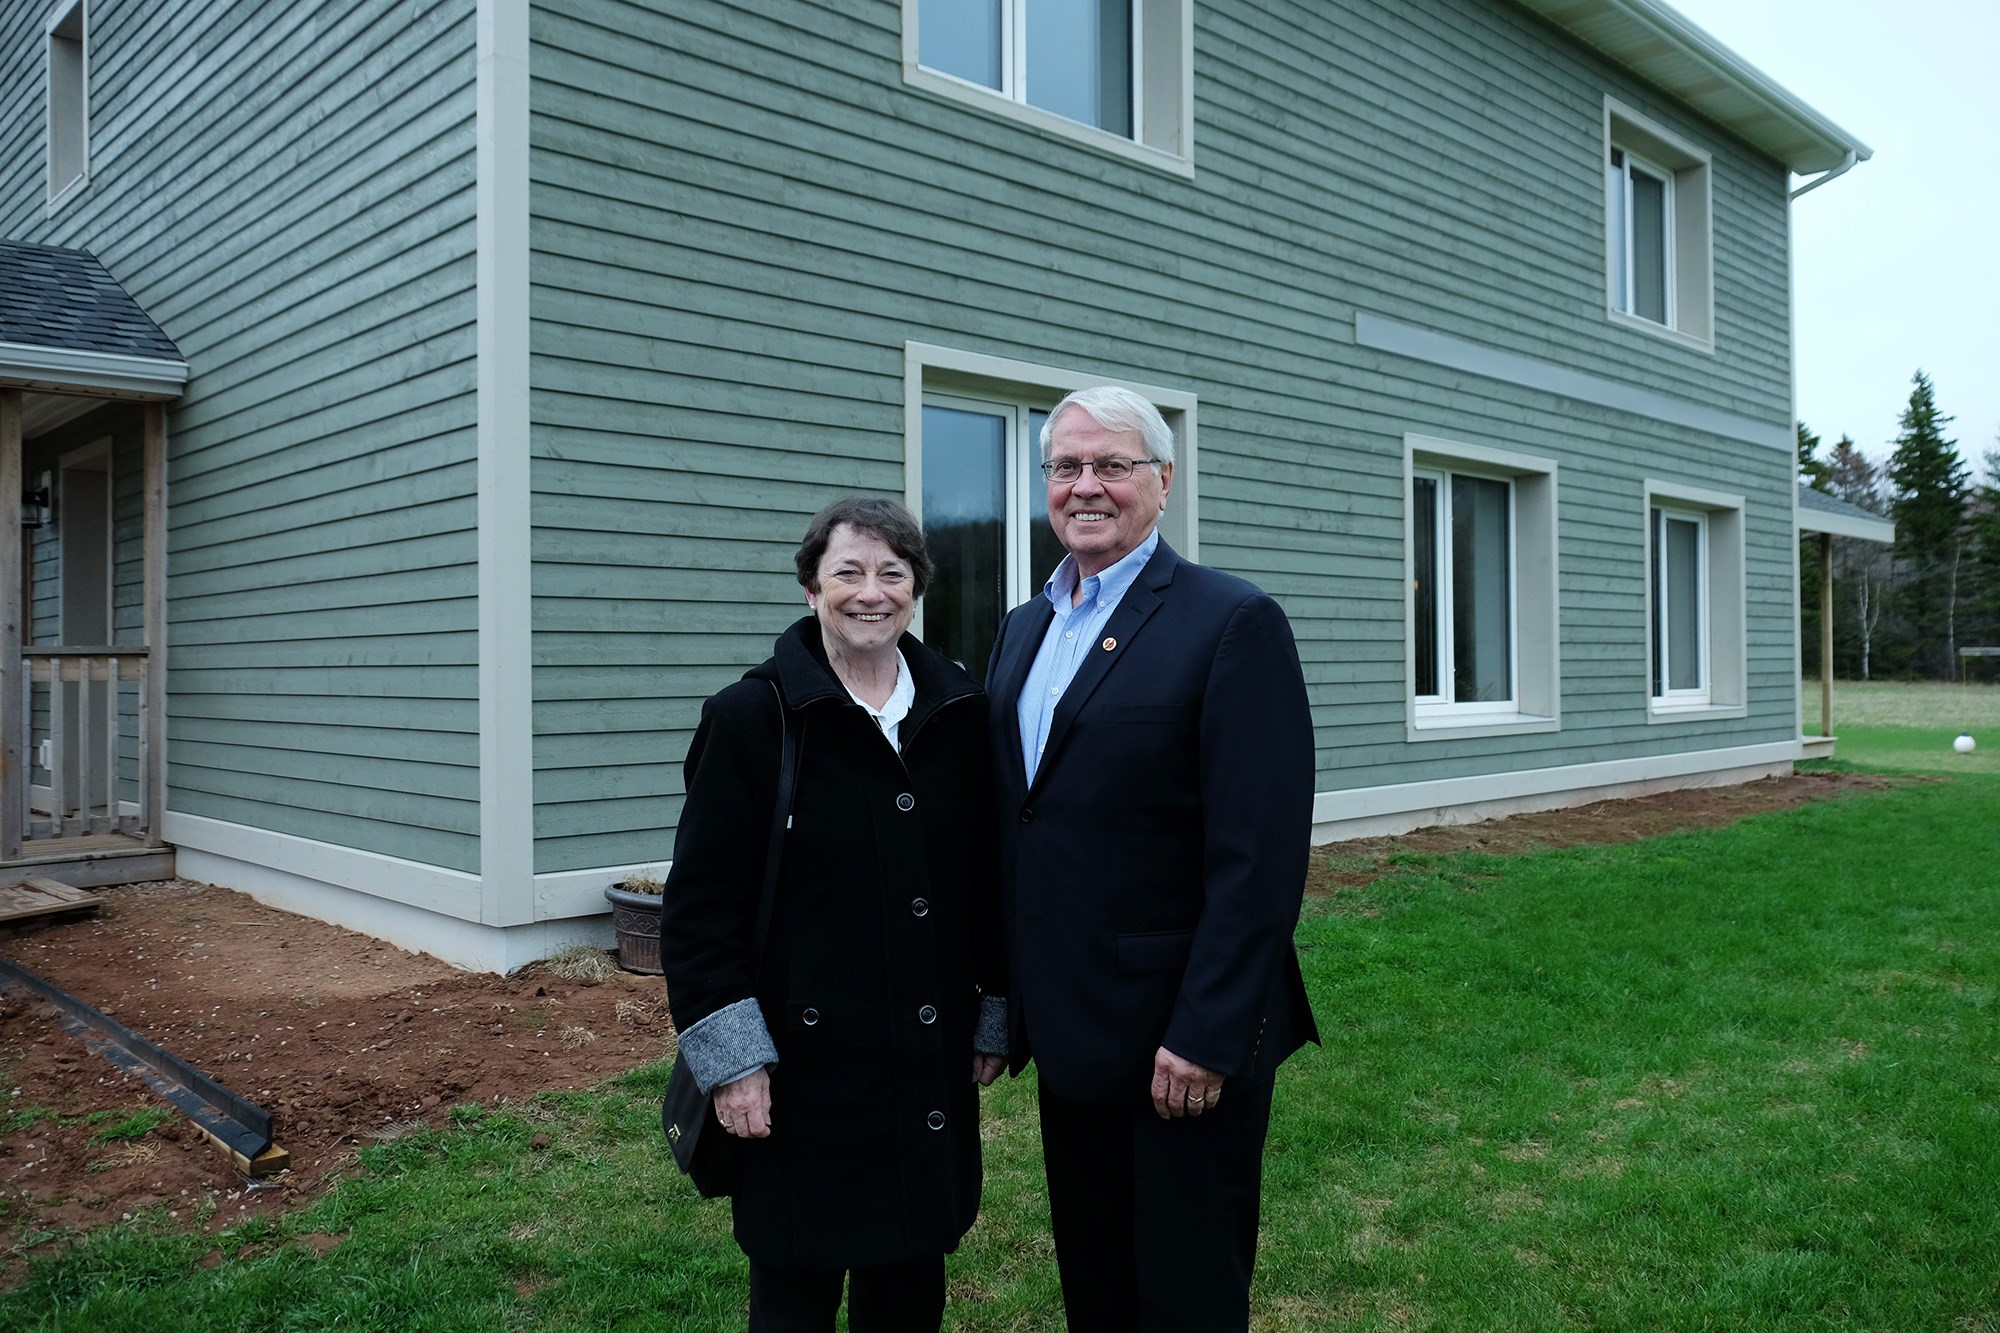 Senator Richard Neufeld and Senator Diane F. Griffin visit a resident’s home in Prince Edward Island during a Senate Committee on Energy, the Environment and Natural Resources fact-finding mission on a low-carbon economy in May 2017.